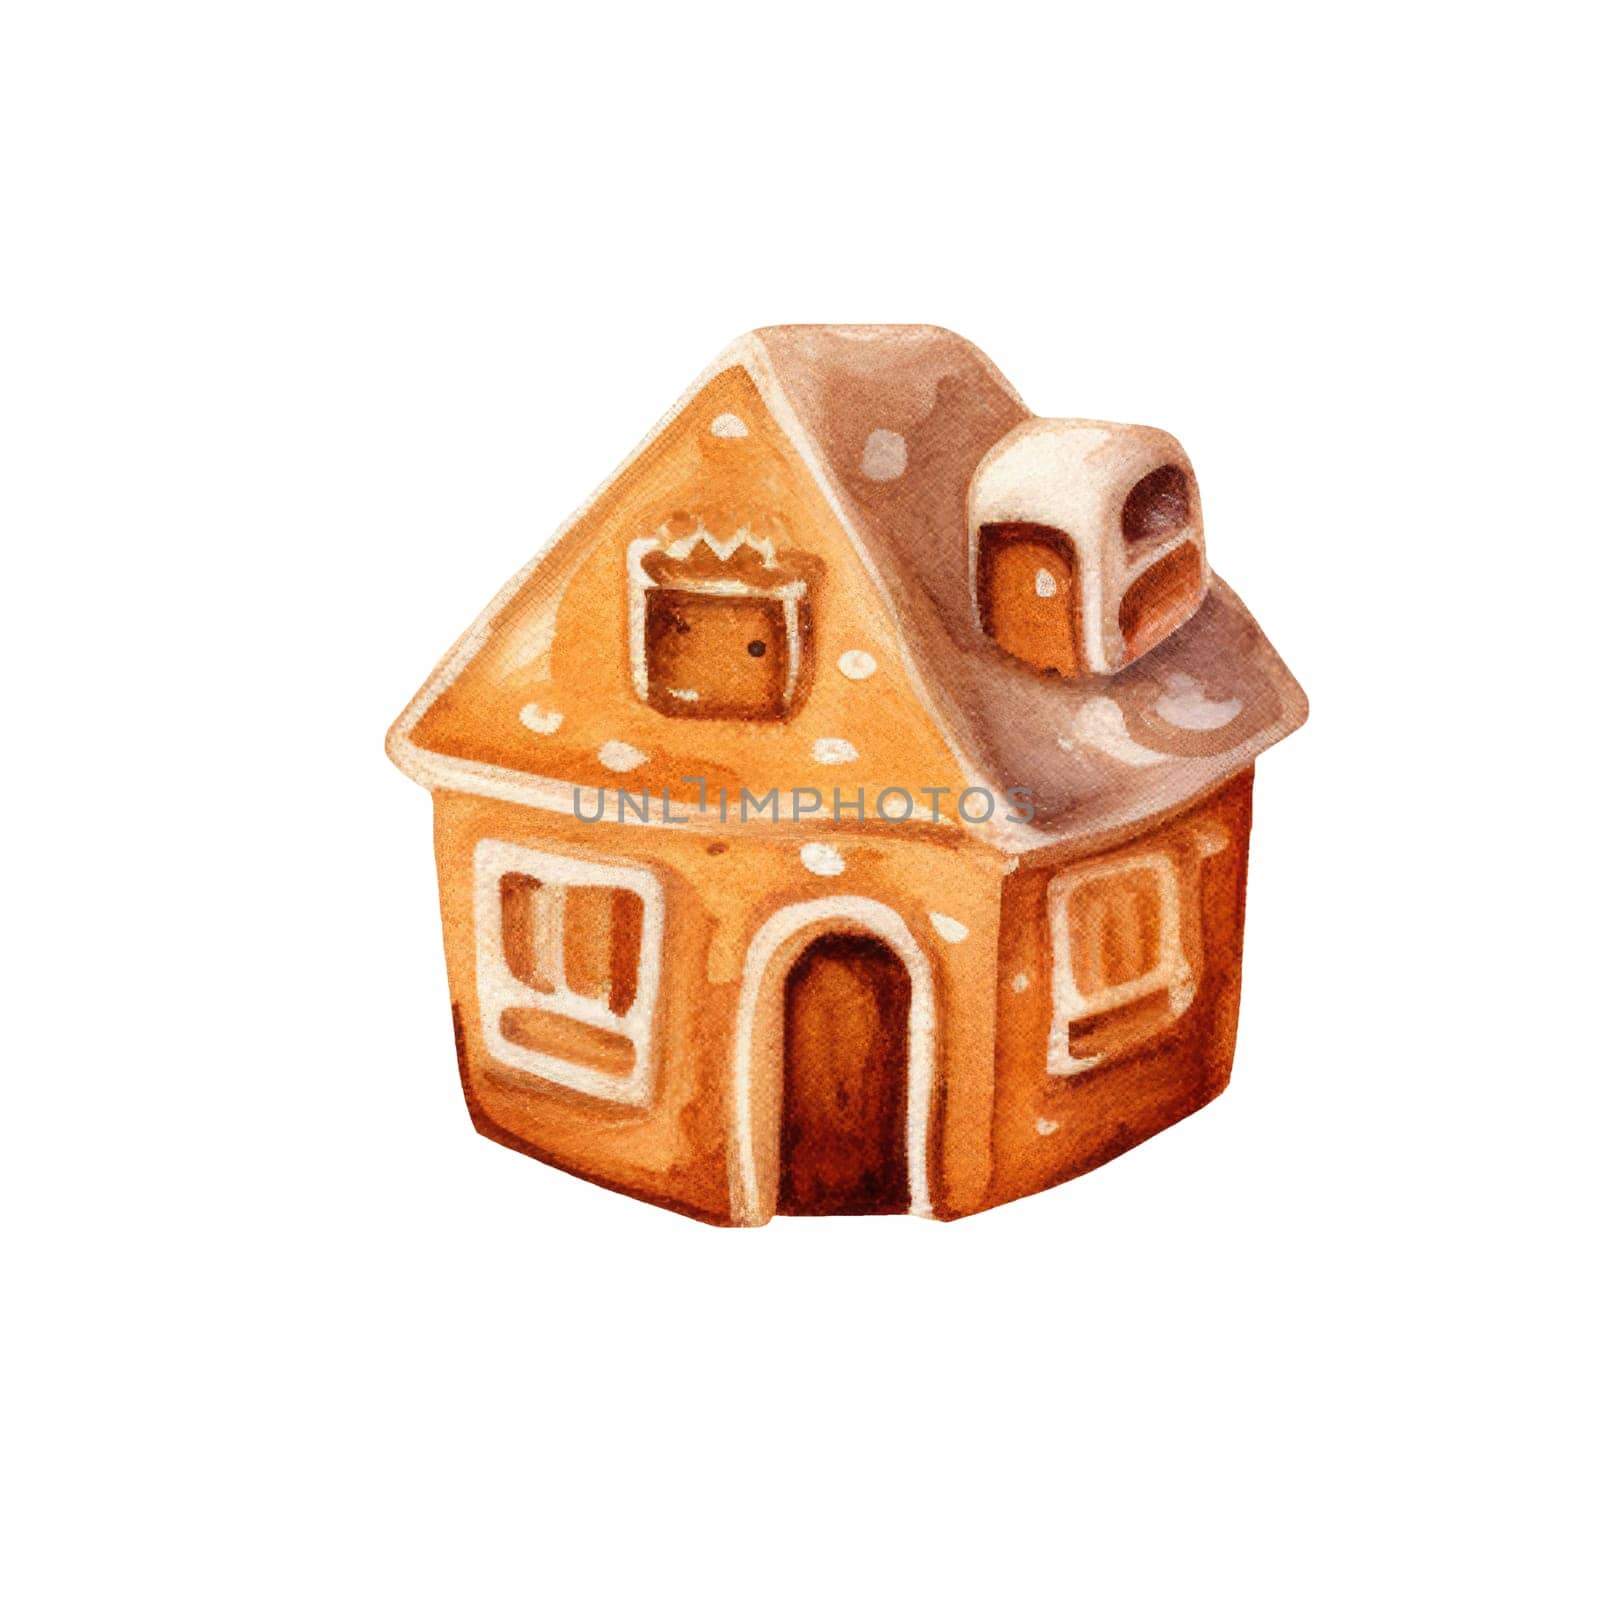 Cute cartoon christmas gingerbread house. Watercolor gingerbread house by natali_brill